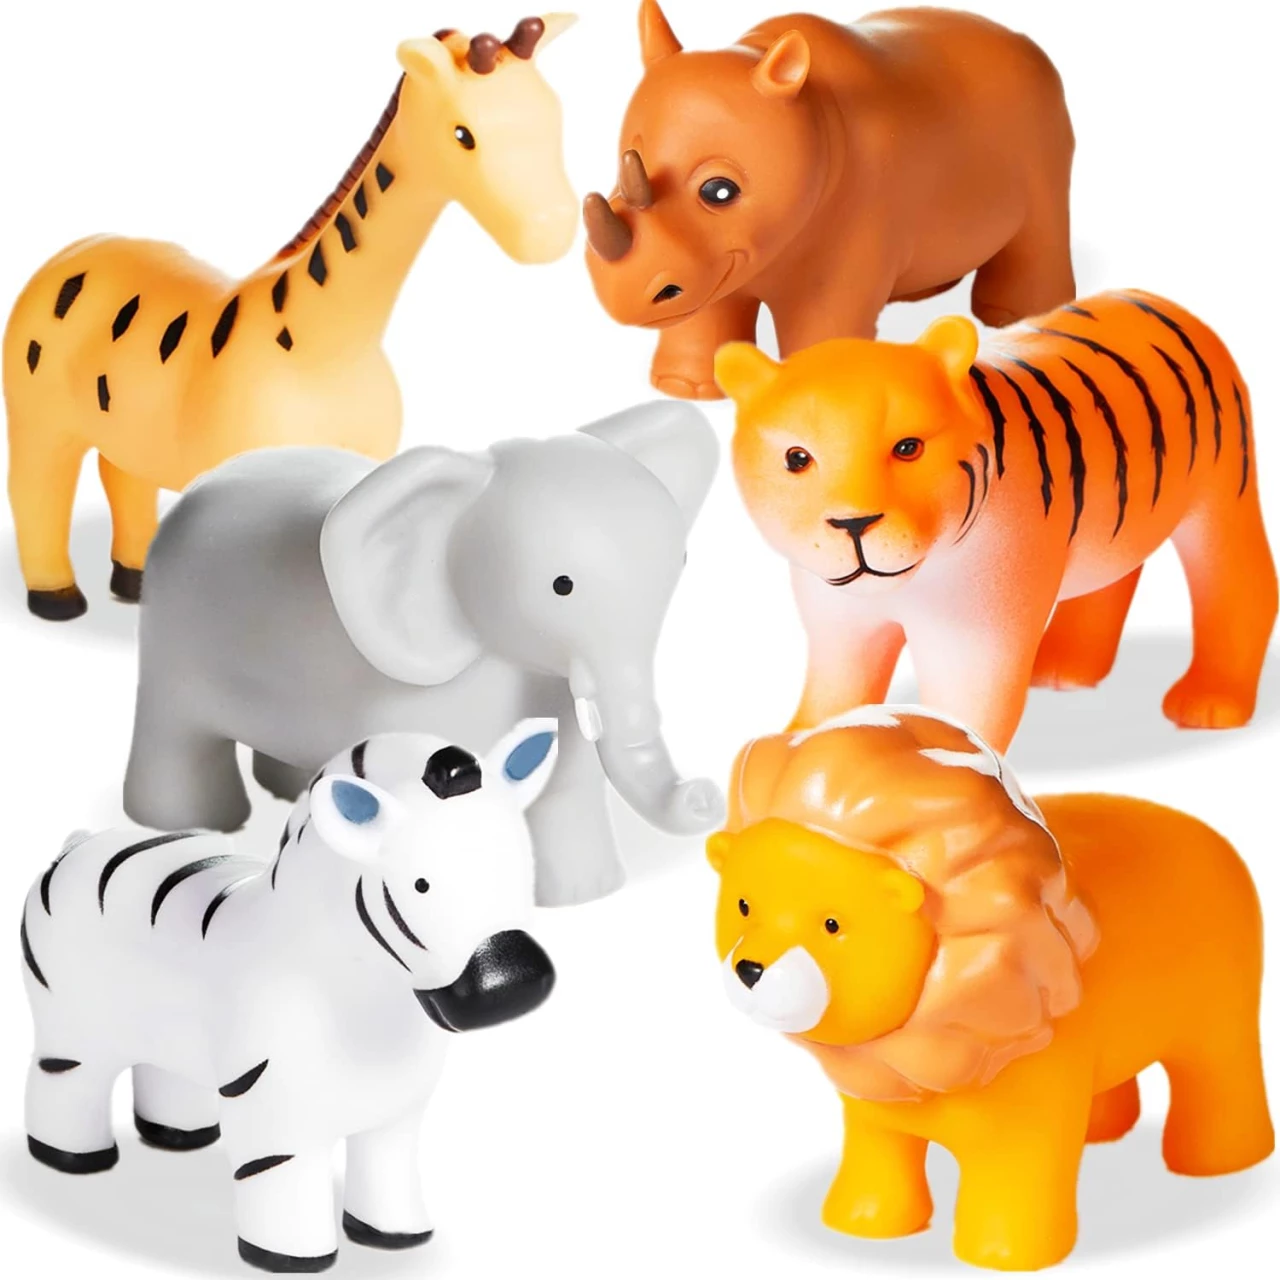 Mold Free Animal Baby Bath Toys for Toddlers/ Infants 6 - 12- 18 Months, No Hole No Mold Bathtub Toys, 1 2 3 4 Years Old Kids (6 Pcs with Storage Bag)